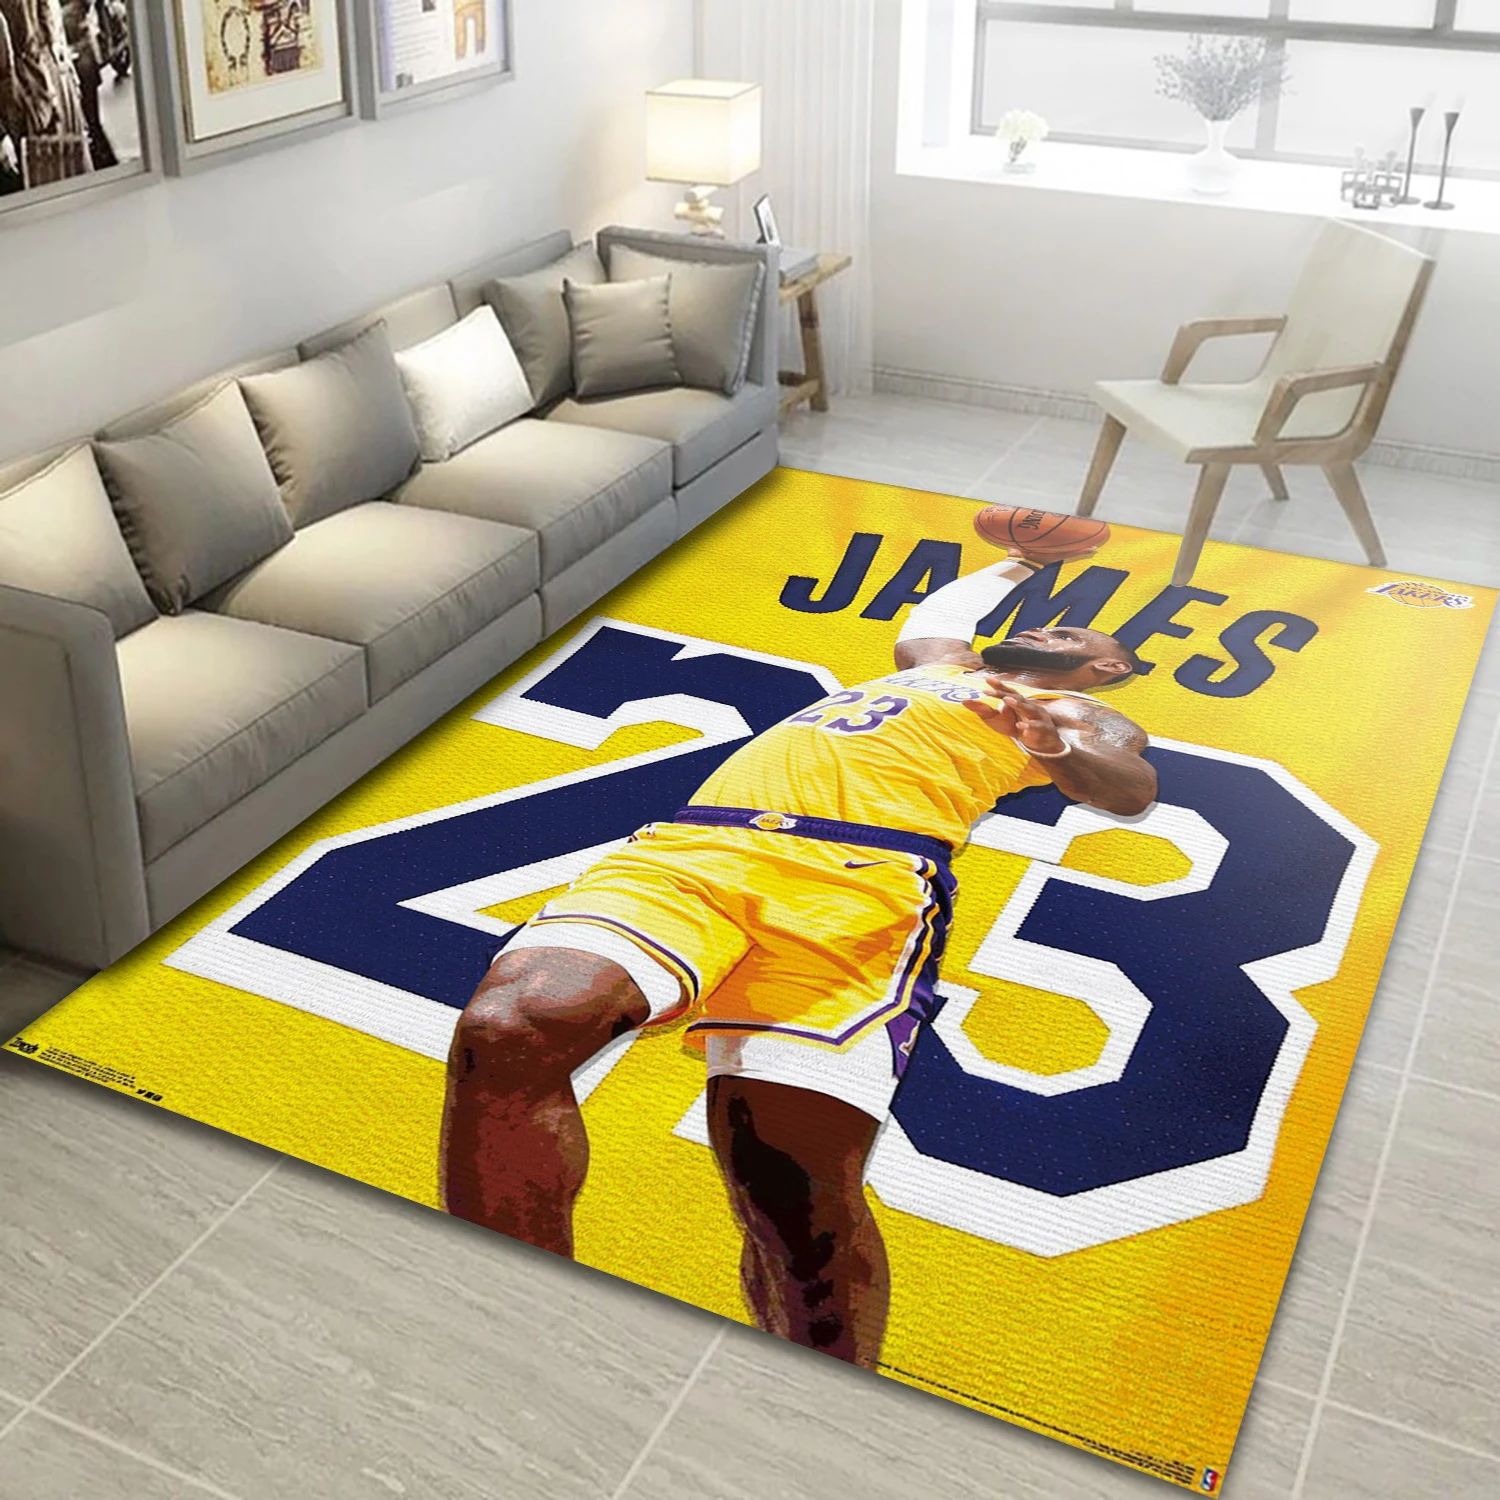 Lebron James Los Angeles Lakers NBA Area Rug For Christmas, Living Room Rug - Room Decor - Indoor Outdoor Rugs 1